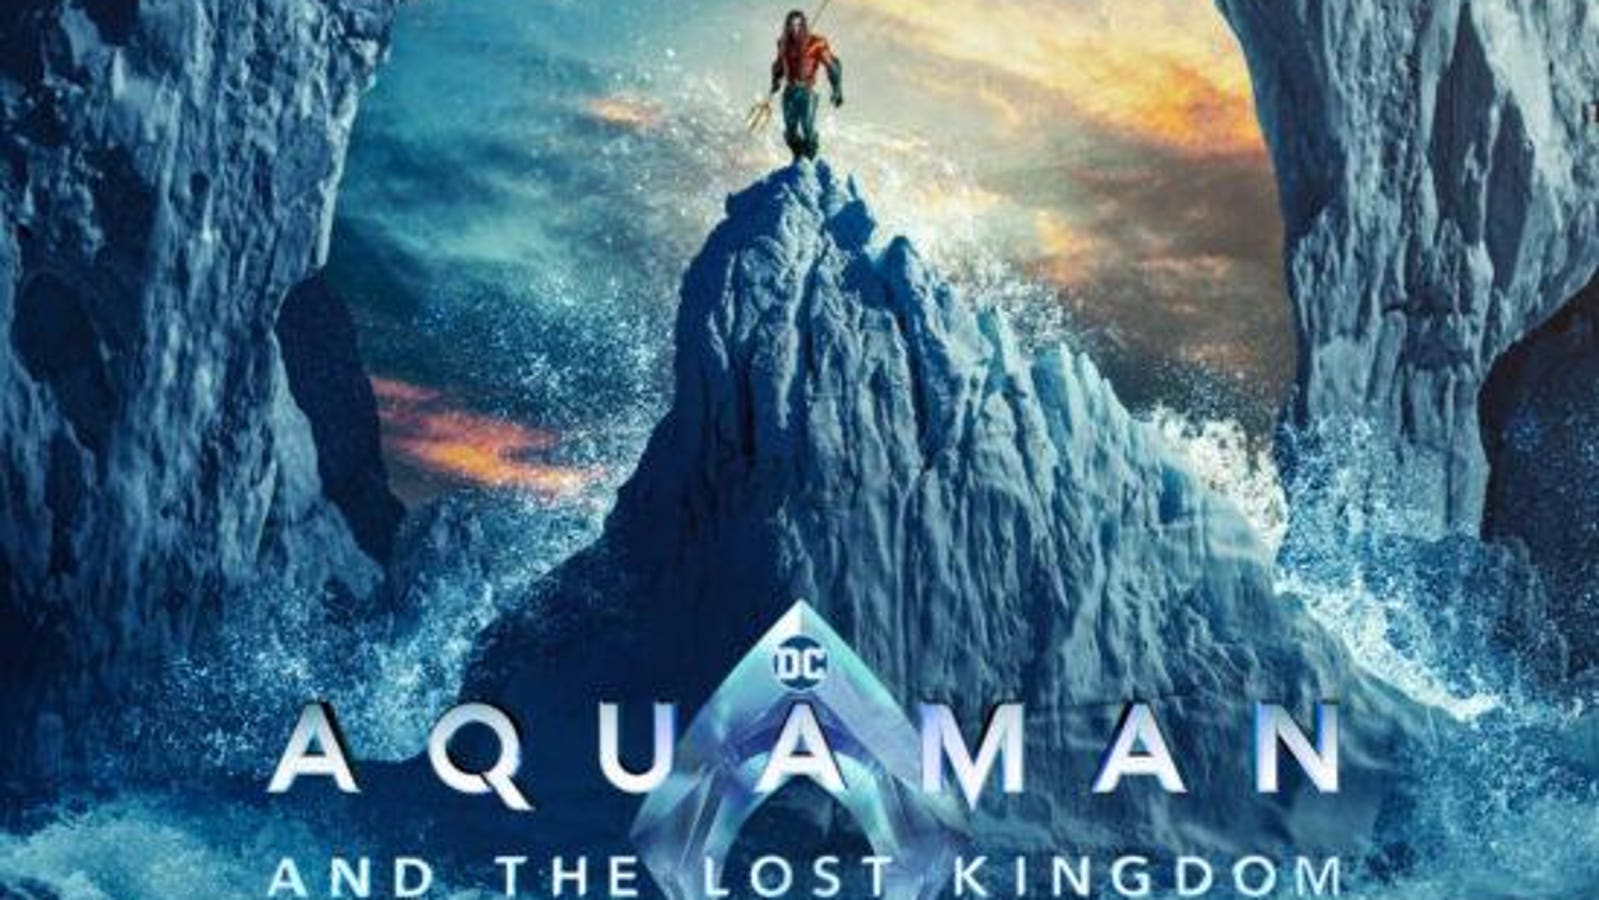 What Is The Best Cinema Format To Watch Aquaman And The Lost Kingdom?